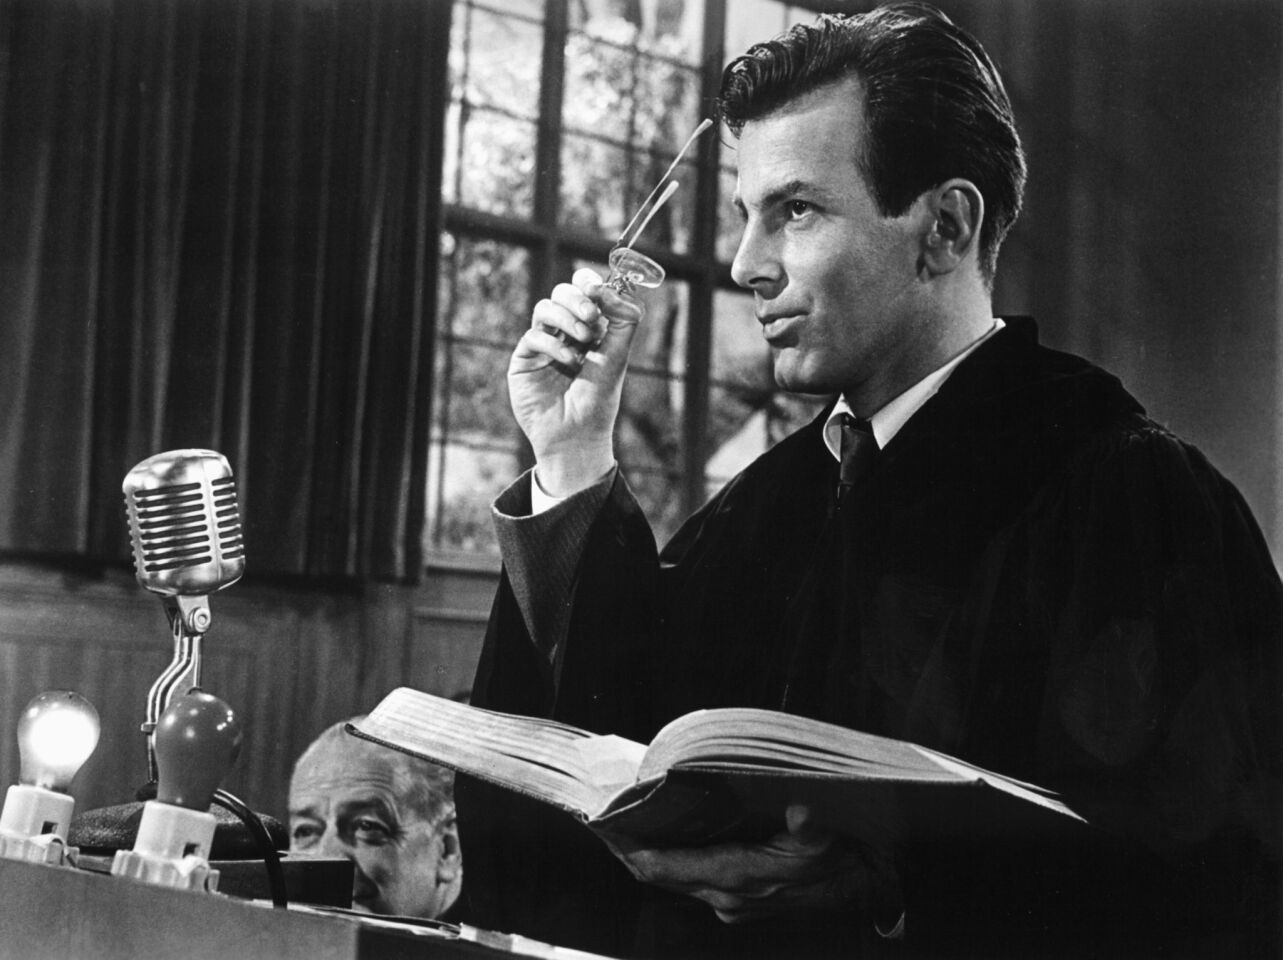 The celebrated actor won the Academy Award in 1962 for his role in "Judgment at Nuremberg." He also directed films, plays and opera. He was 83.